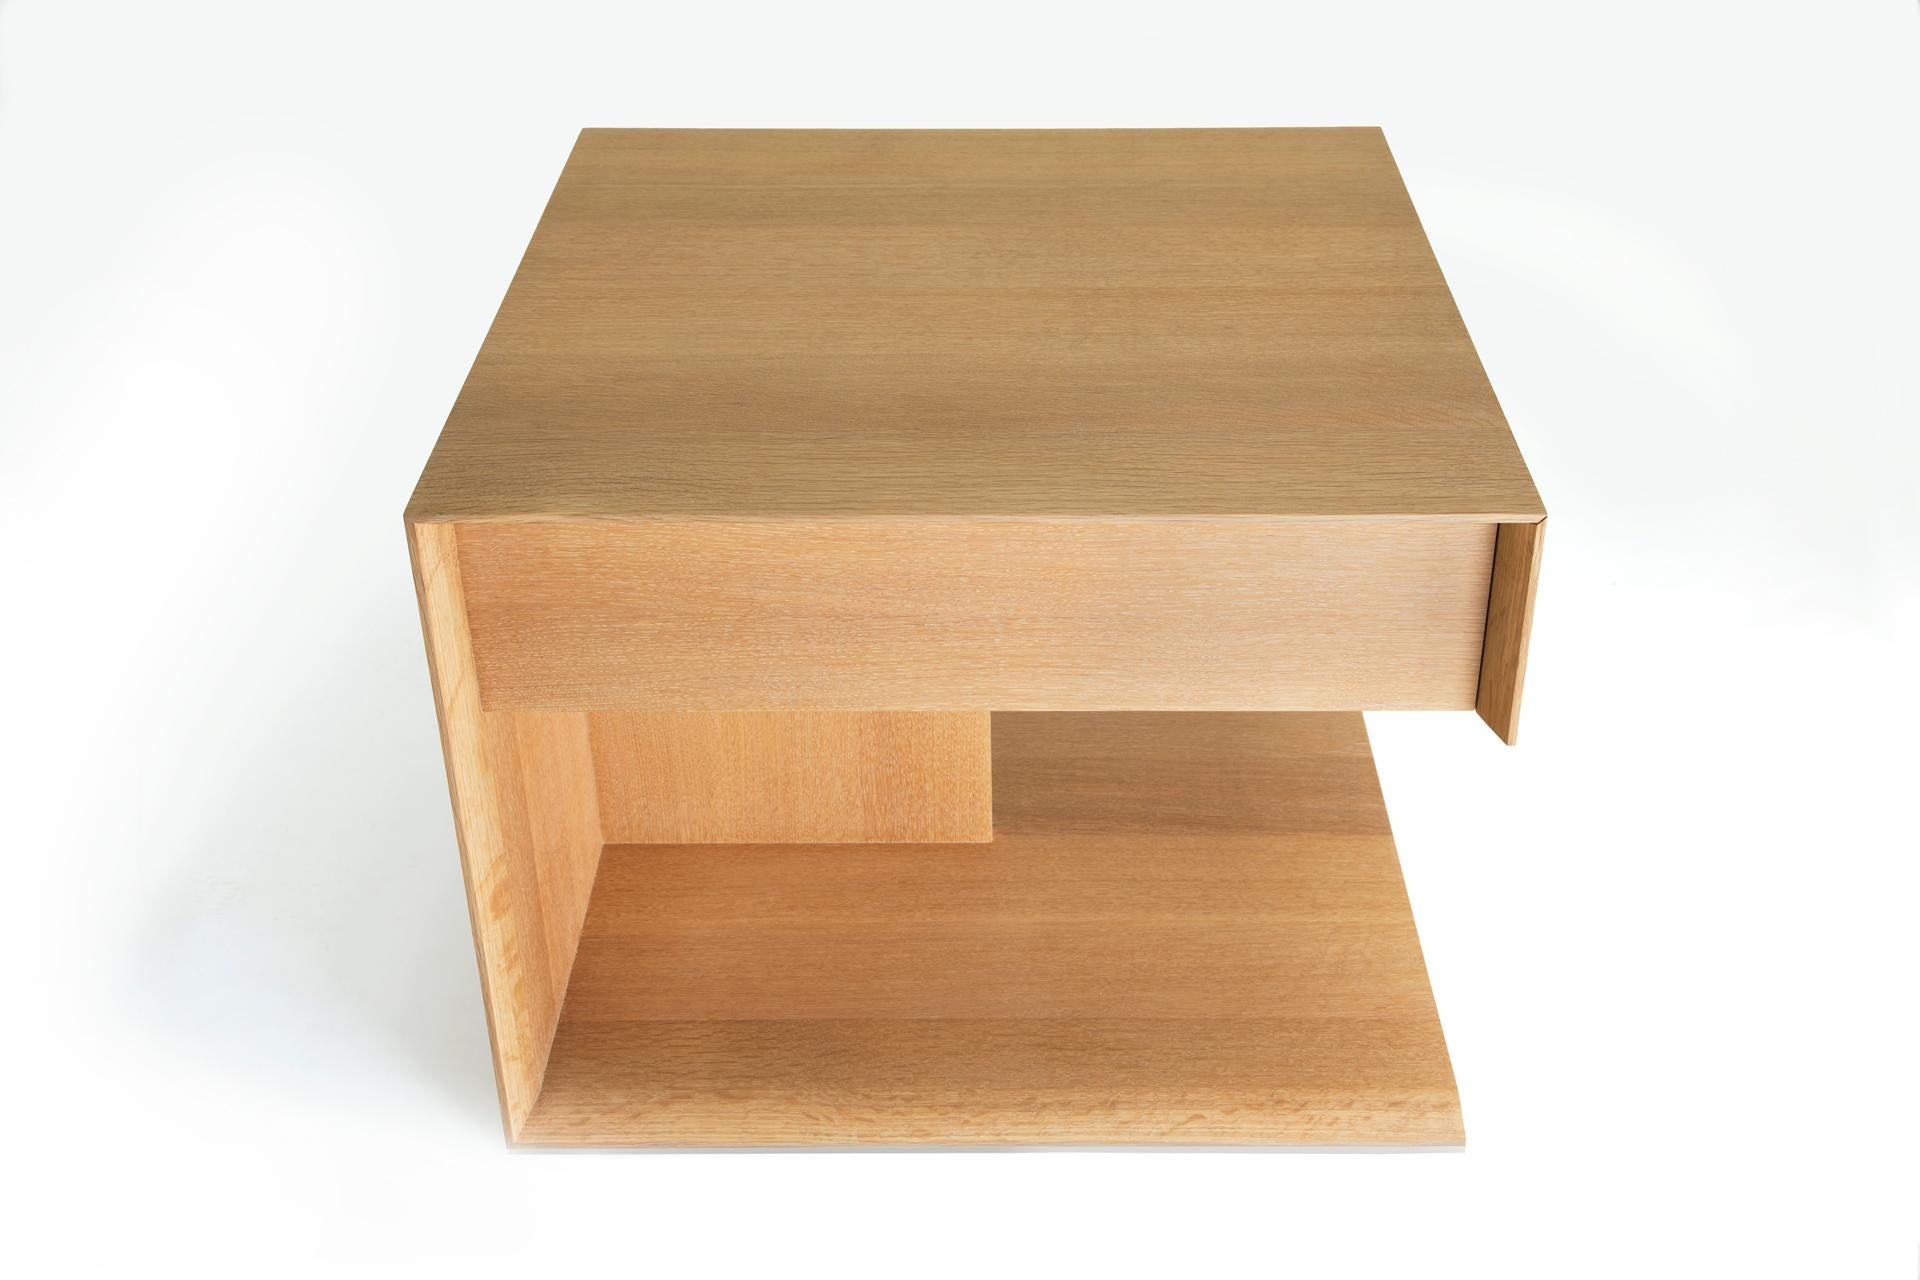 American Modern Wood End Table in Solid White Oak, by Studio DiPaolo